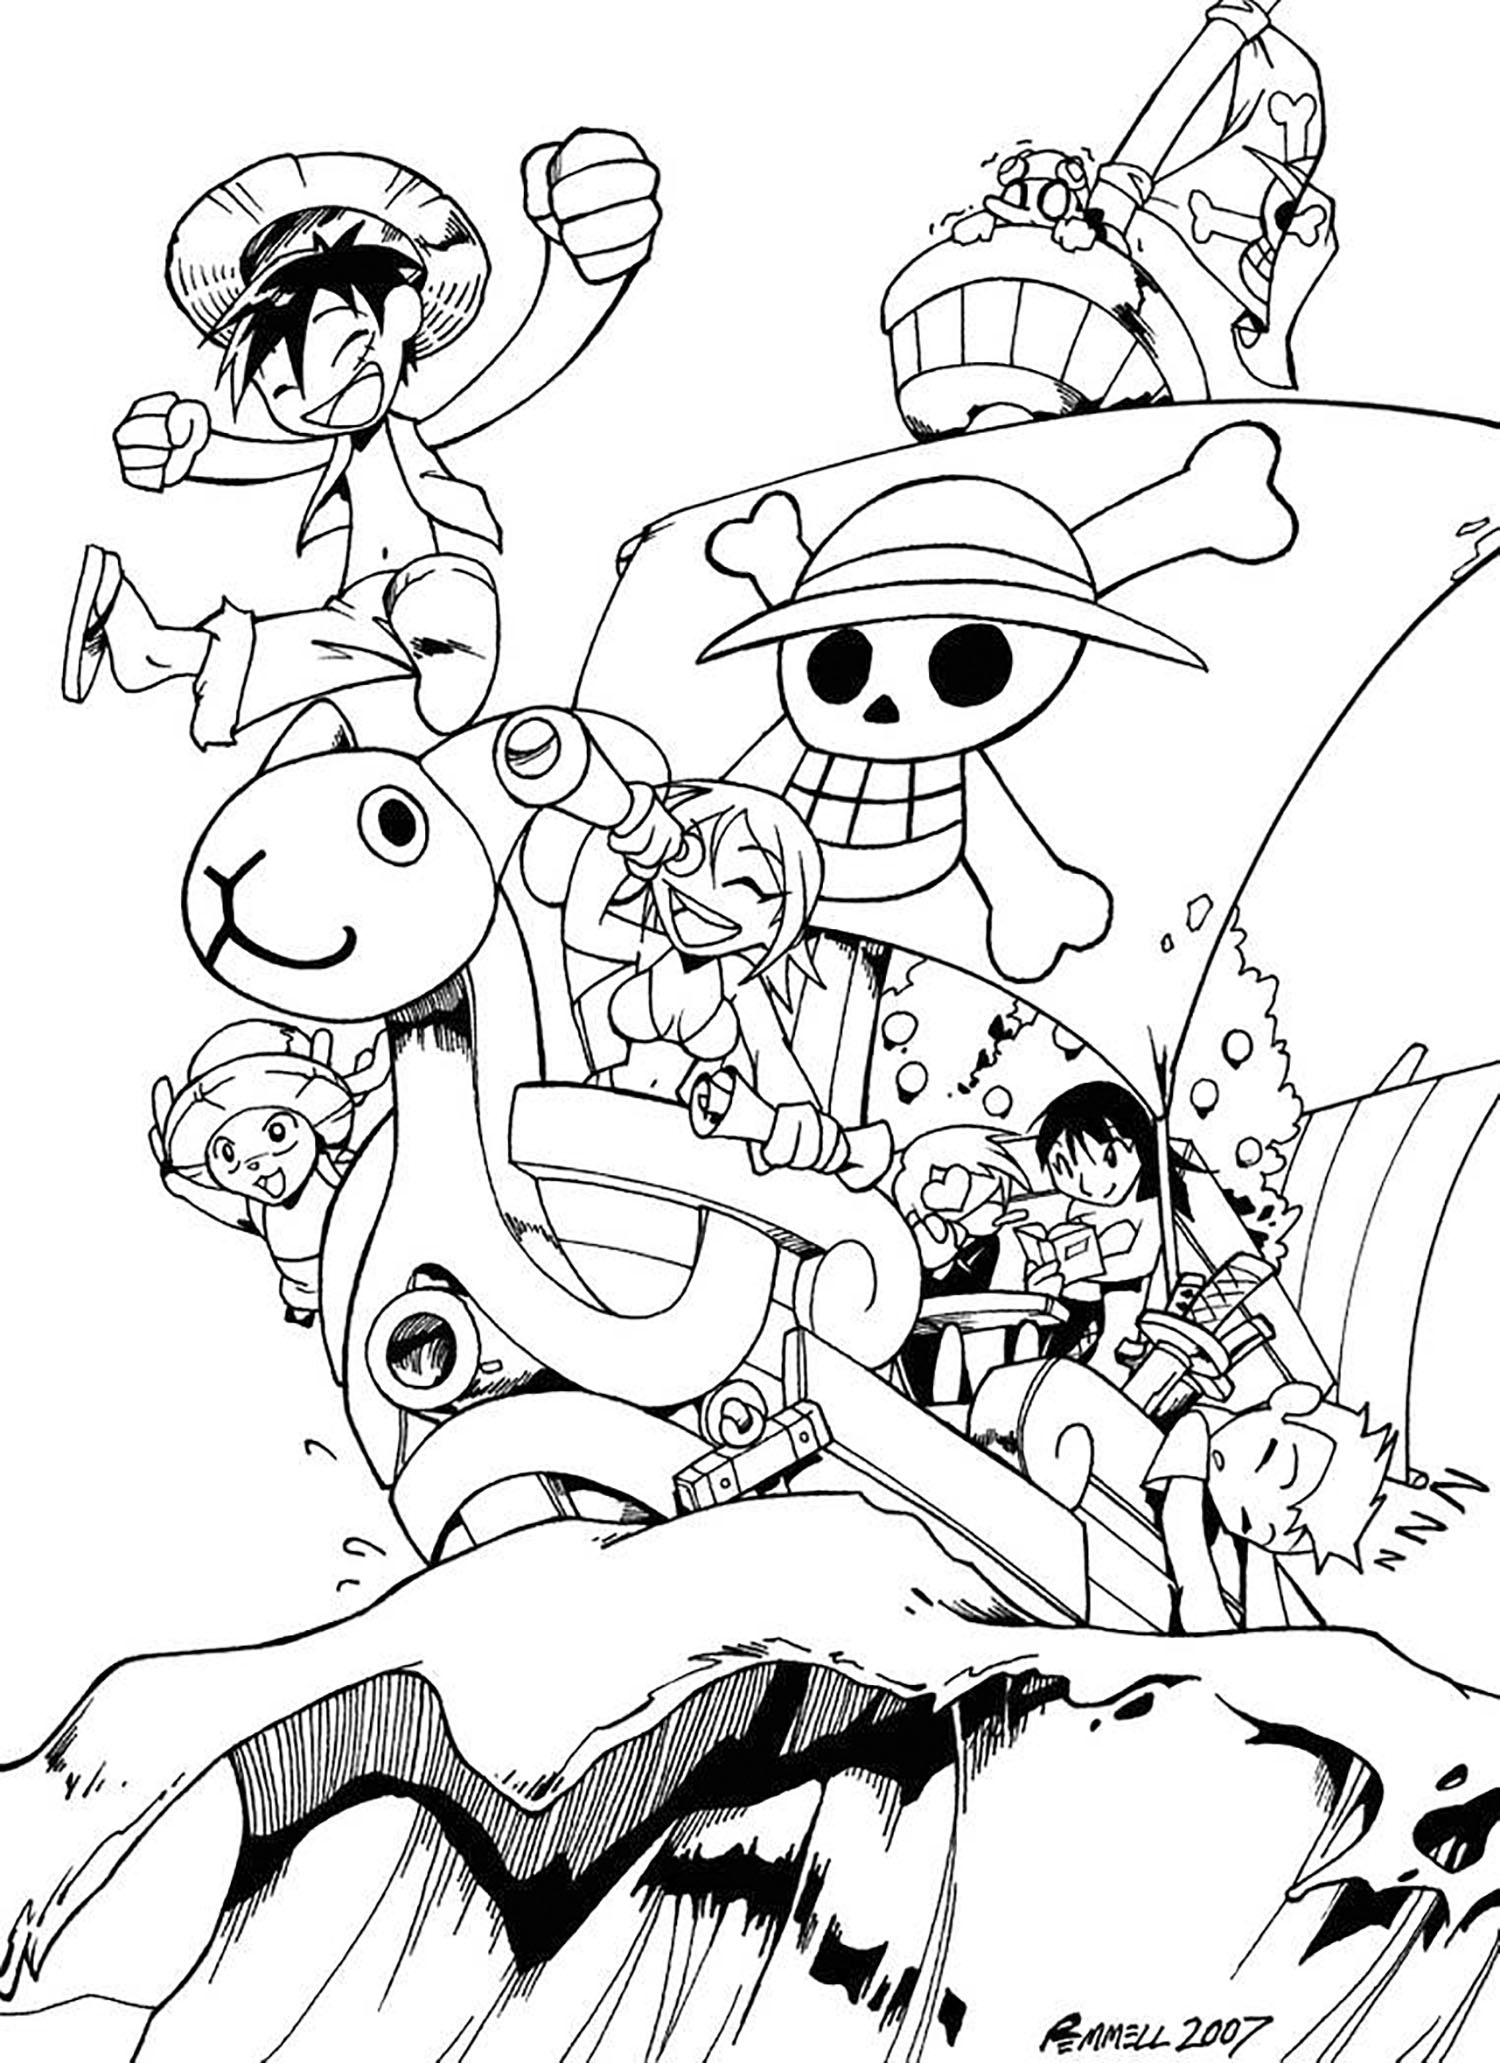 One Piece  Wikipedia tiếng Việt